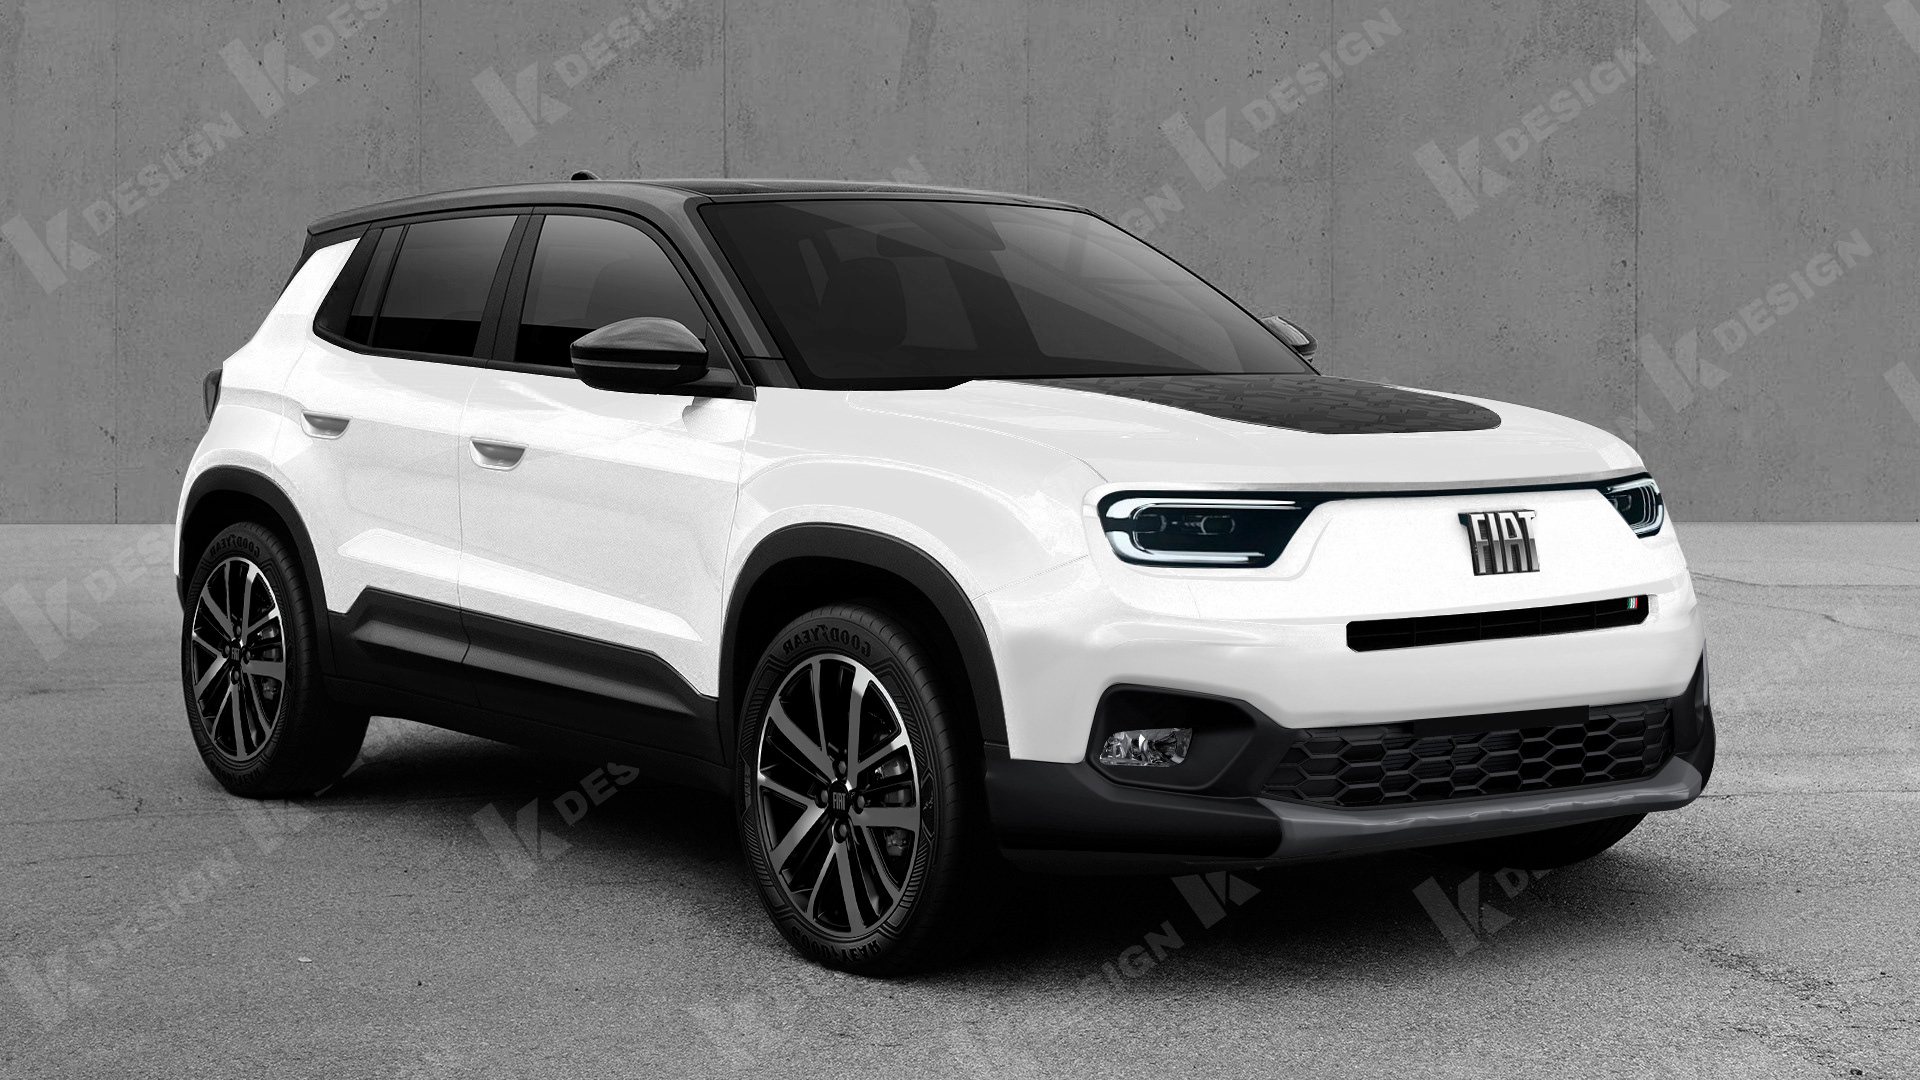 2023 fiat uno morphs jeep ev into ice subcompact crossover suv to set itself apart 193010 1